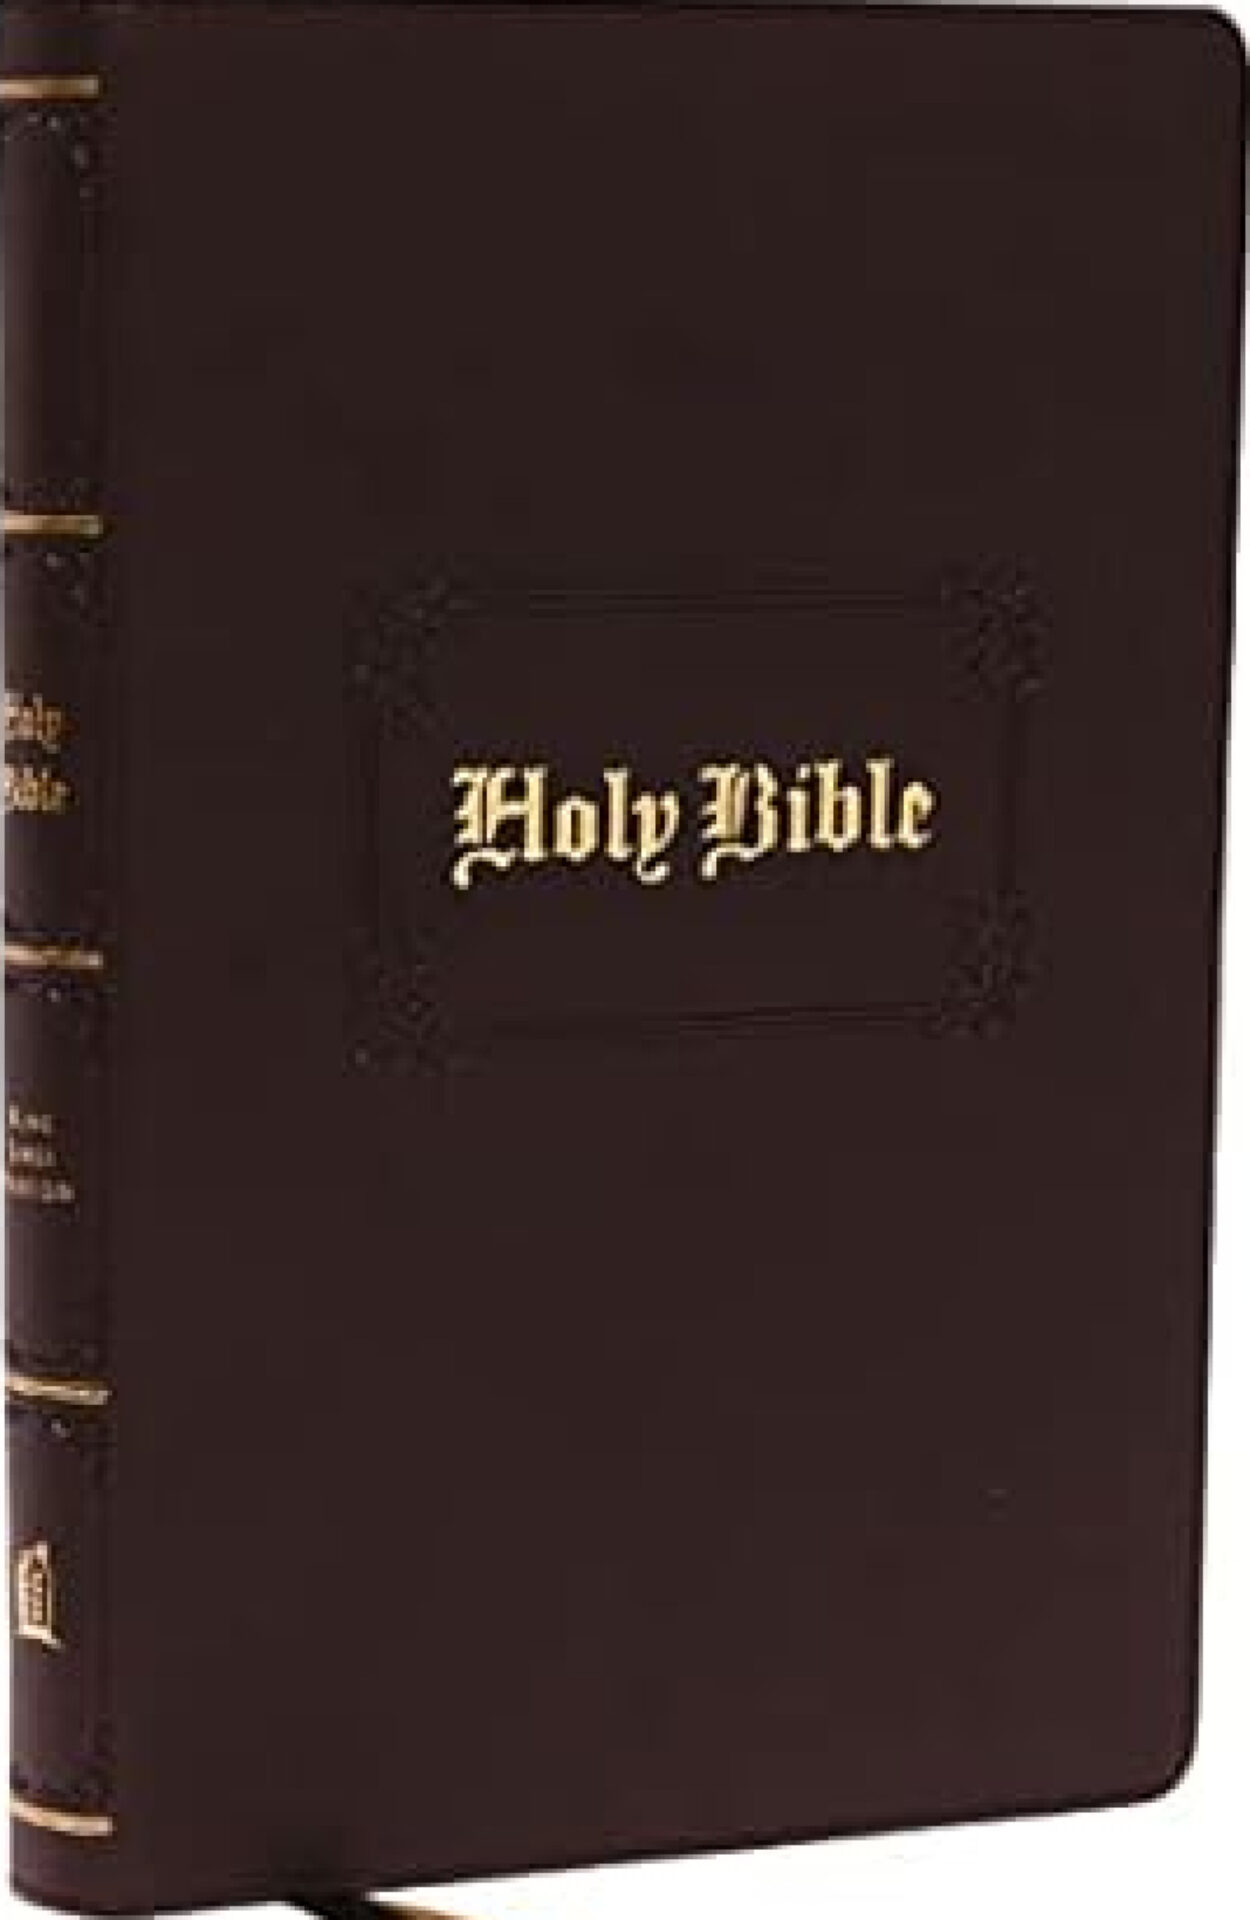 NVI Holy Bible - Economy Large Print Edition (Case of 16)